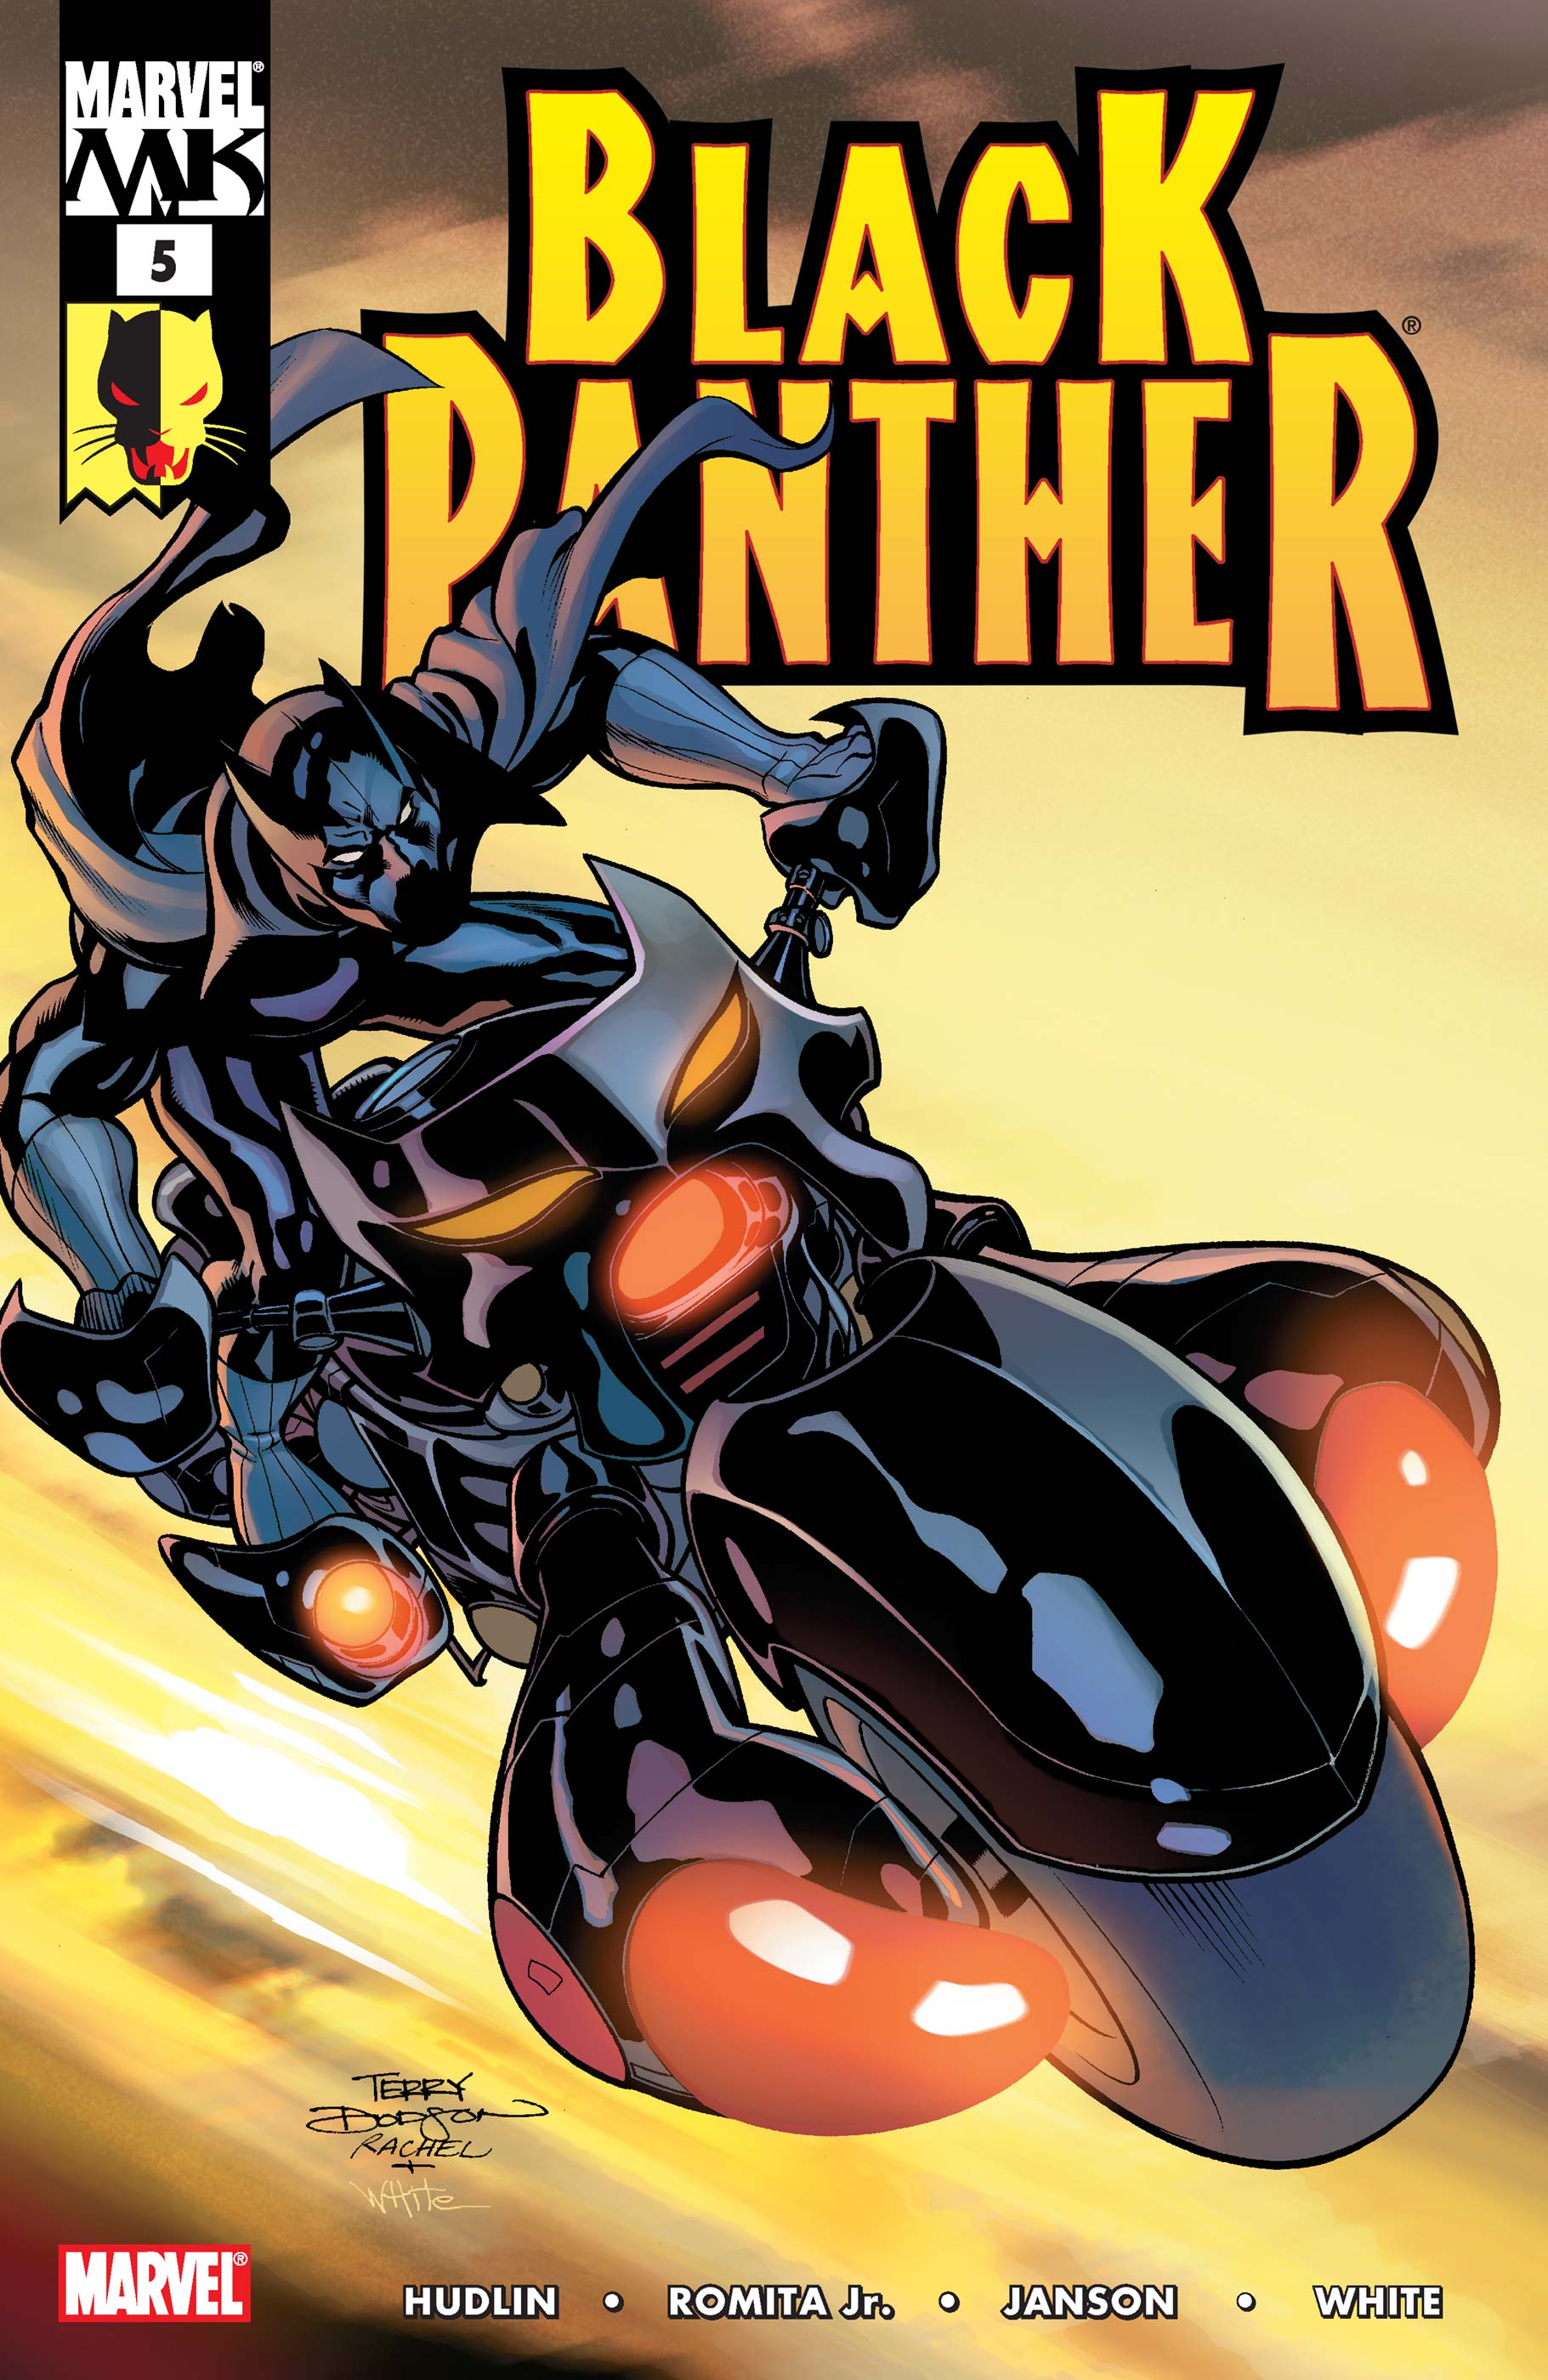 Black Panther (2005) #5 | Comic Issues | Marvel